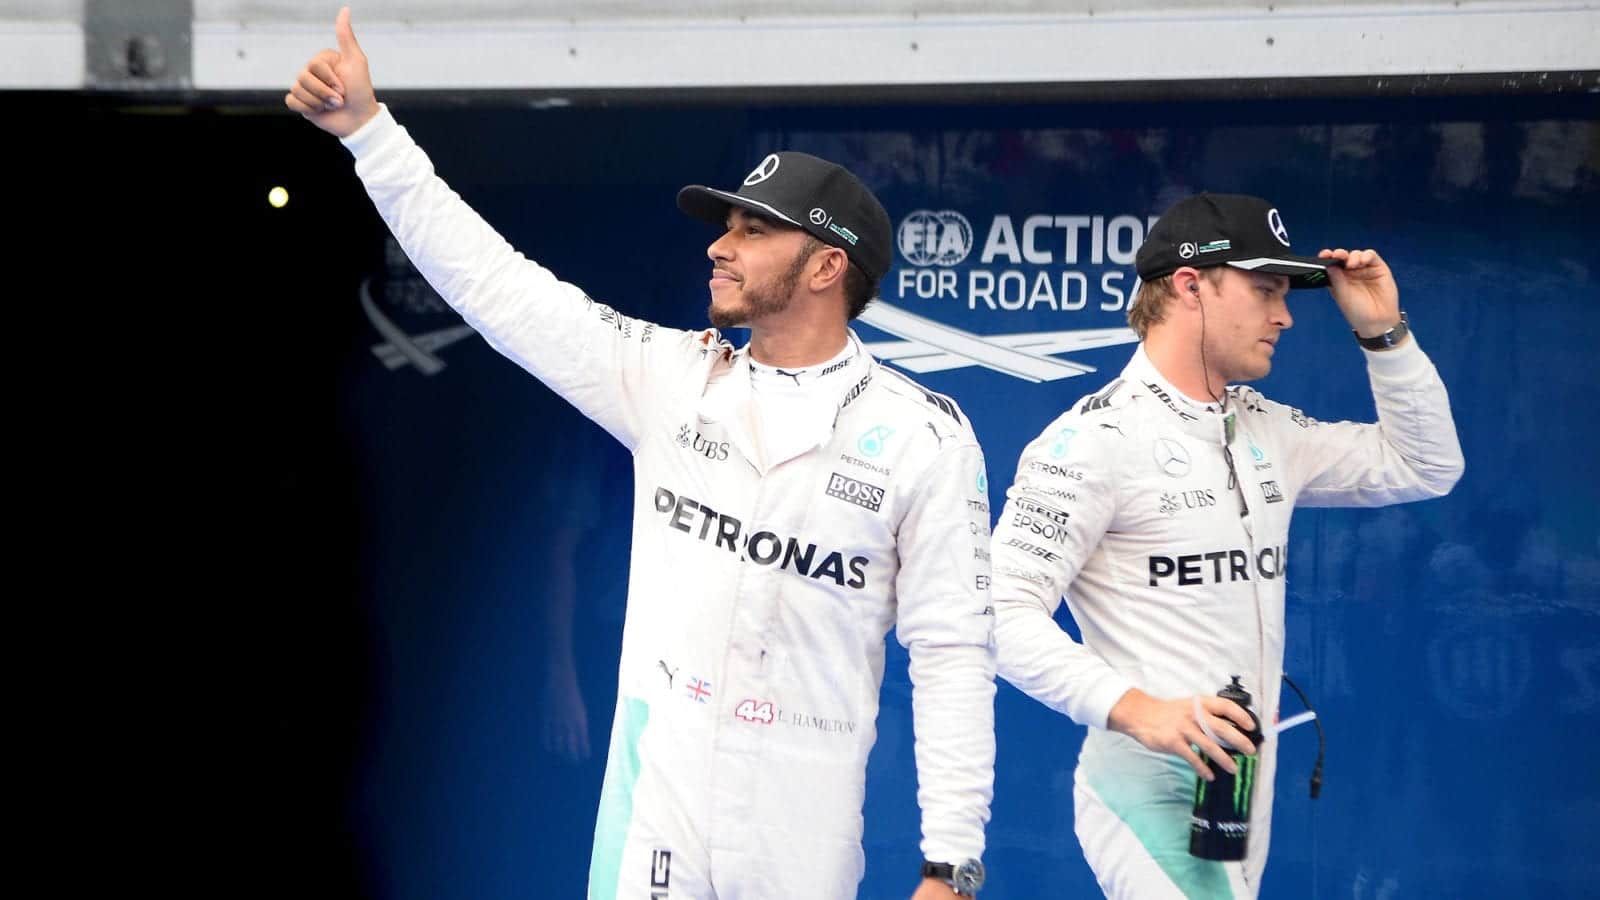 Lewis Hamilton and Nico Rosberg look in opposite directions after qualifying for the 2016 Malaysian Grand Prix